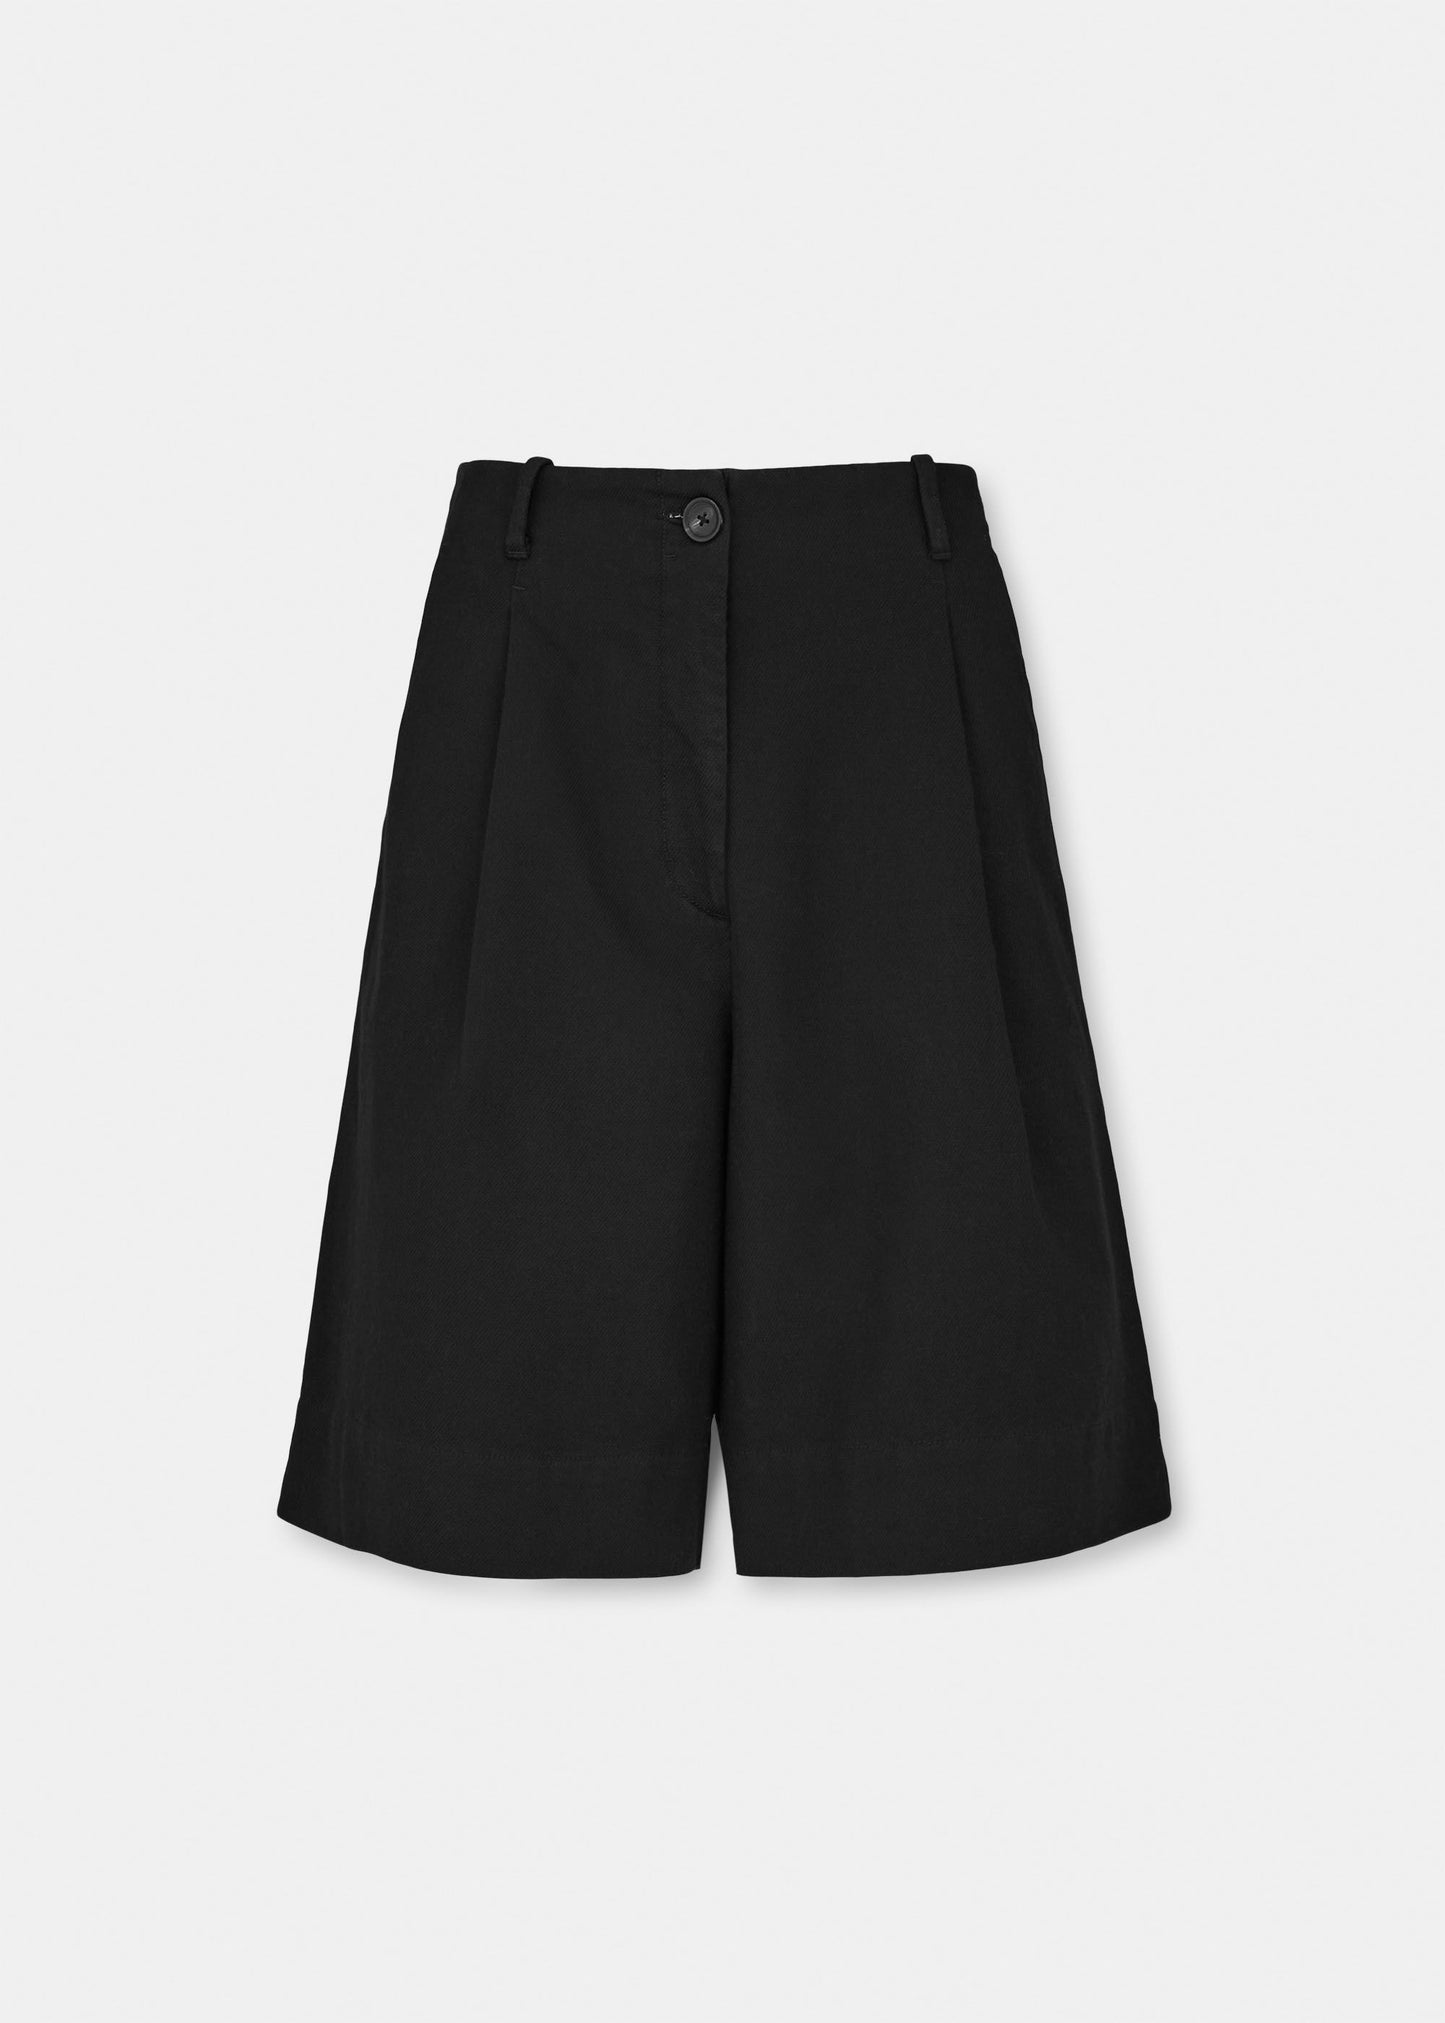 Aiayu "Willy Shorts" Black